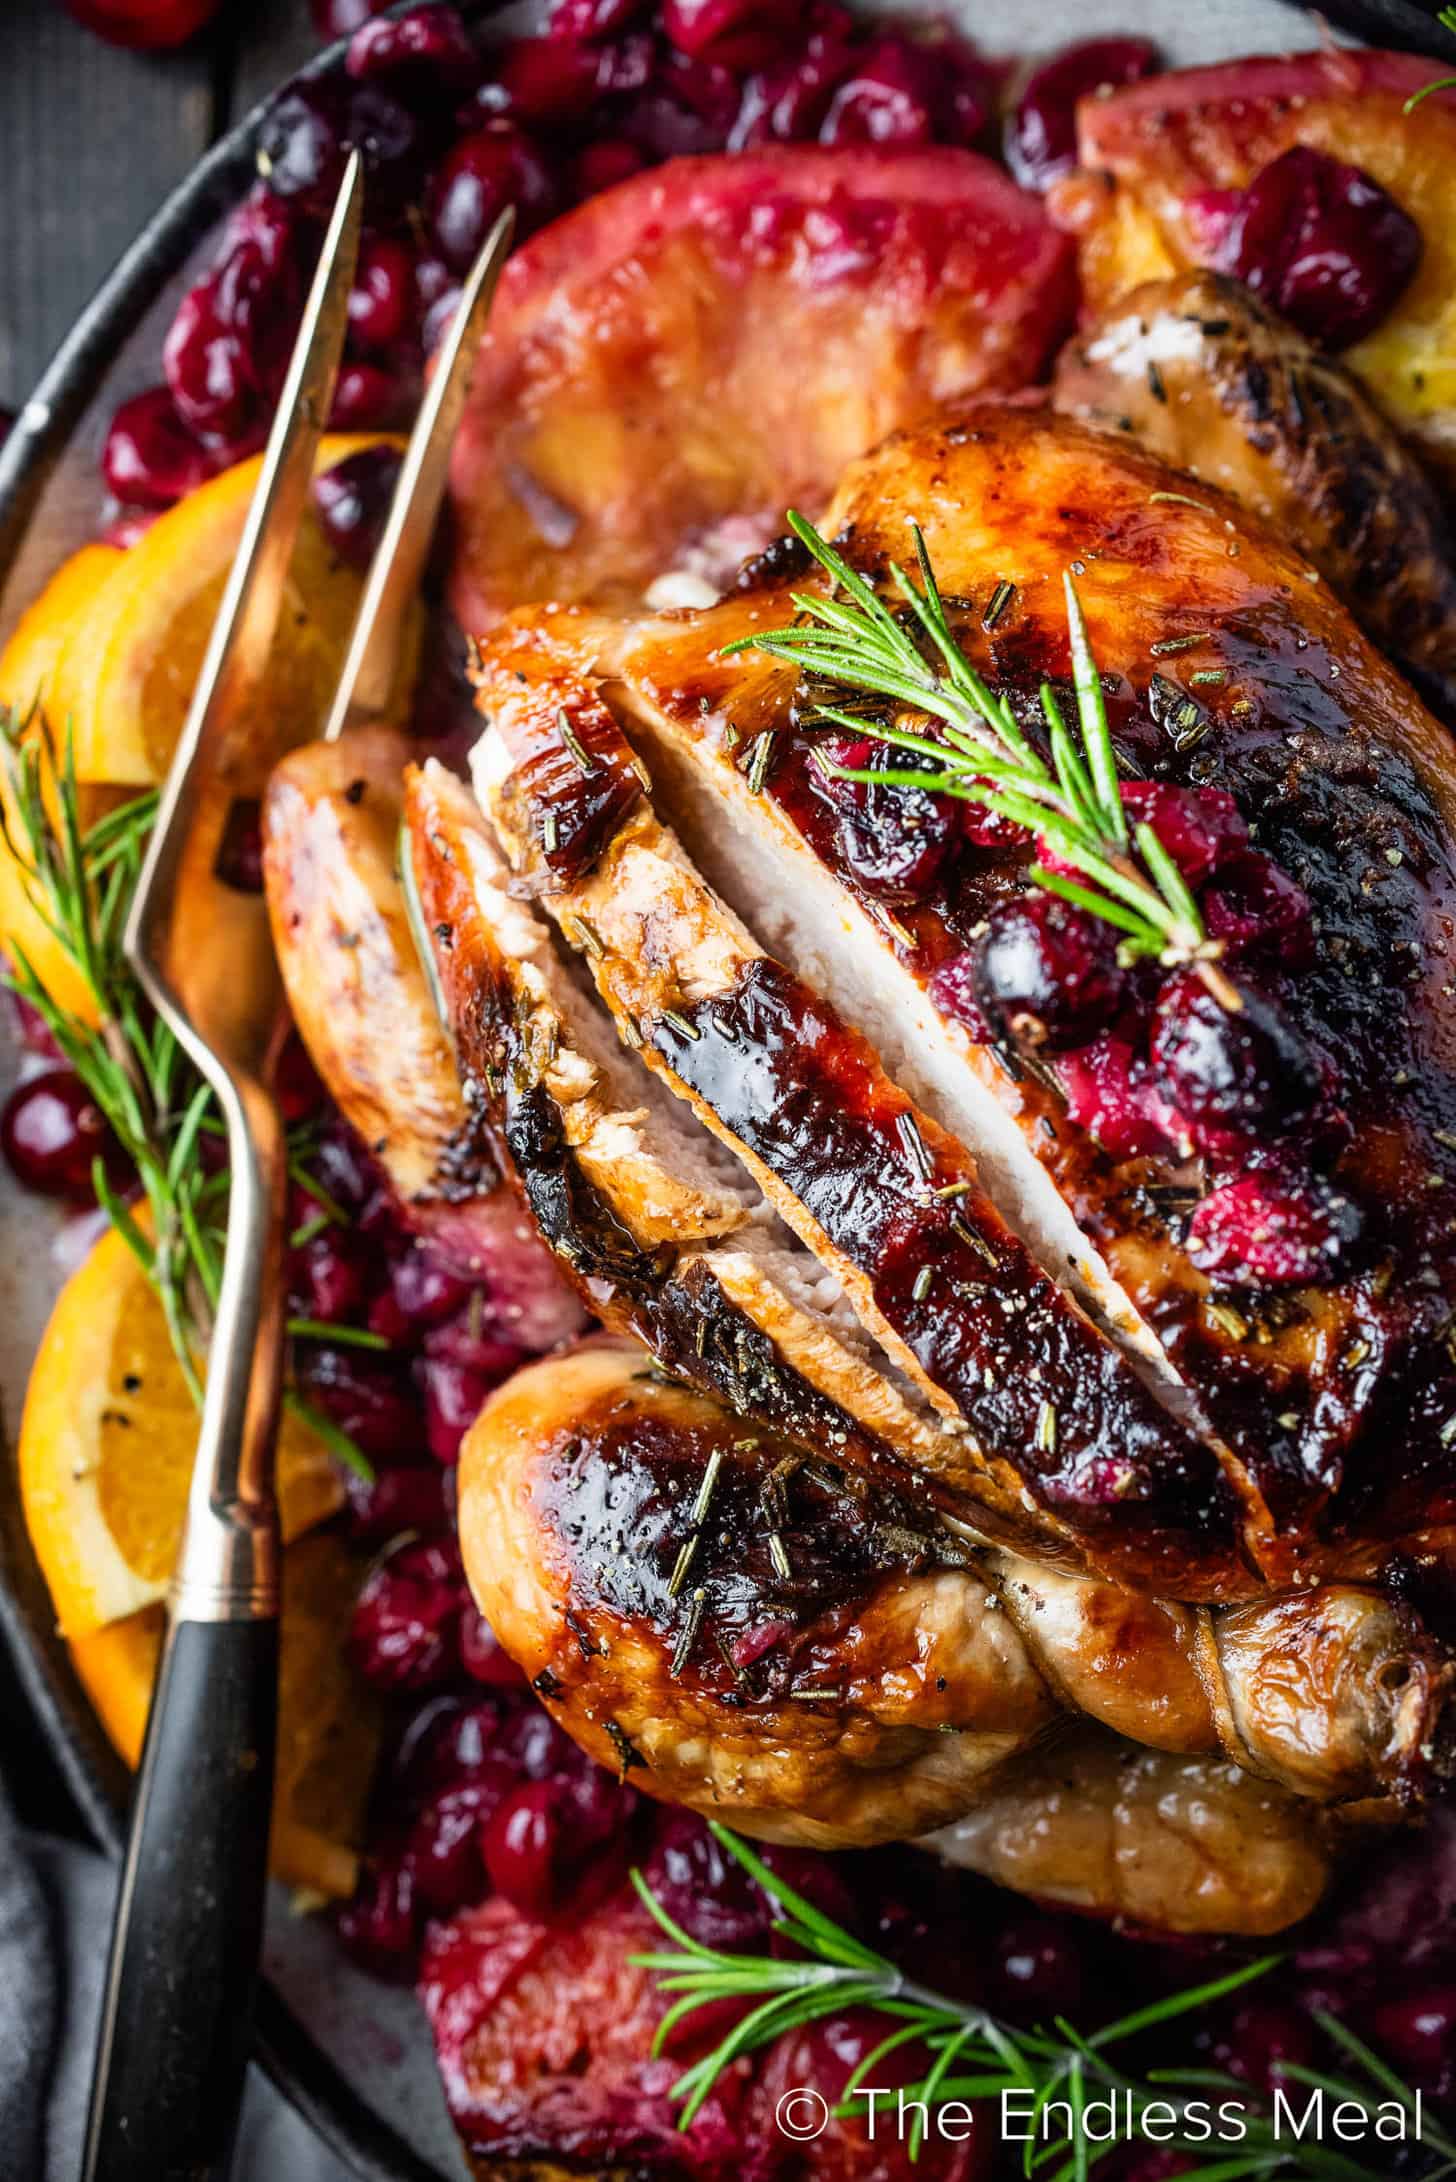 Carving a Cranberry Roasted Chicken